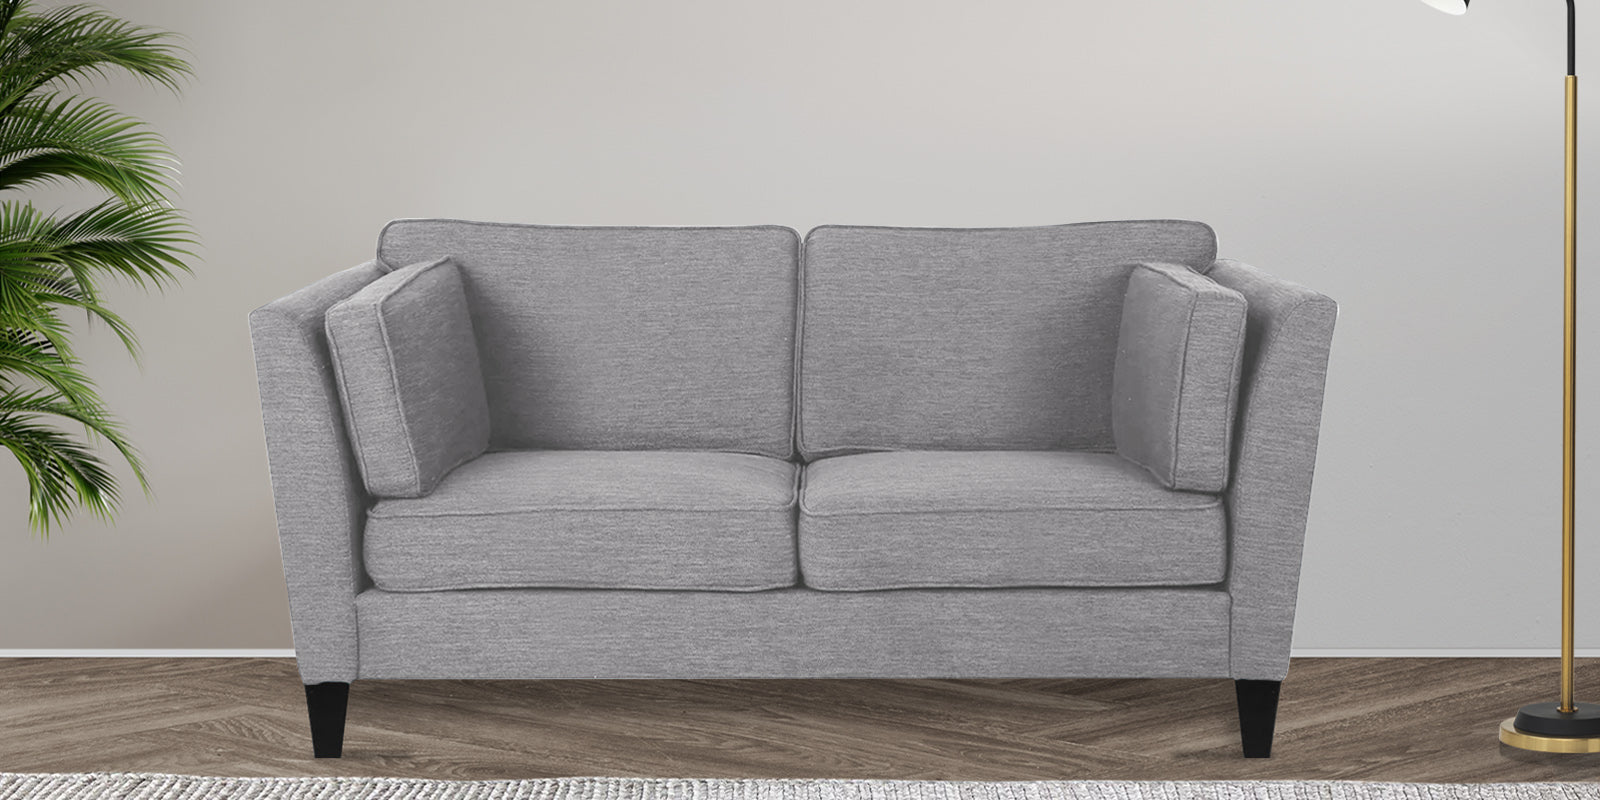 Nigar Fabric 2 Seater Sofa in Lit Grey Colour